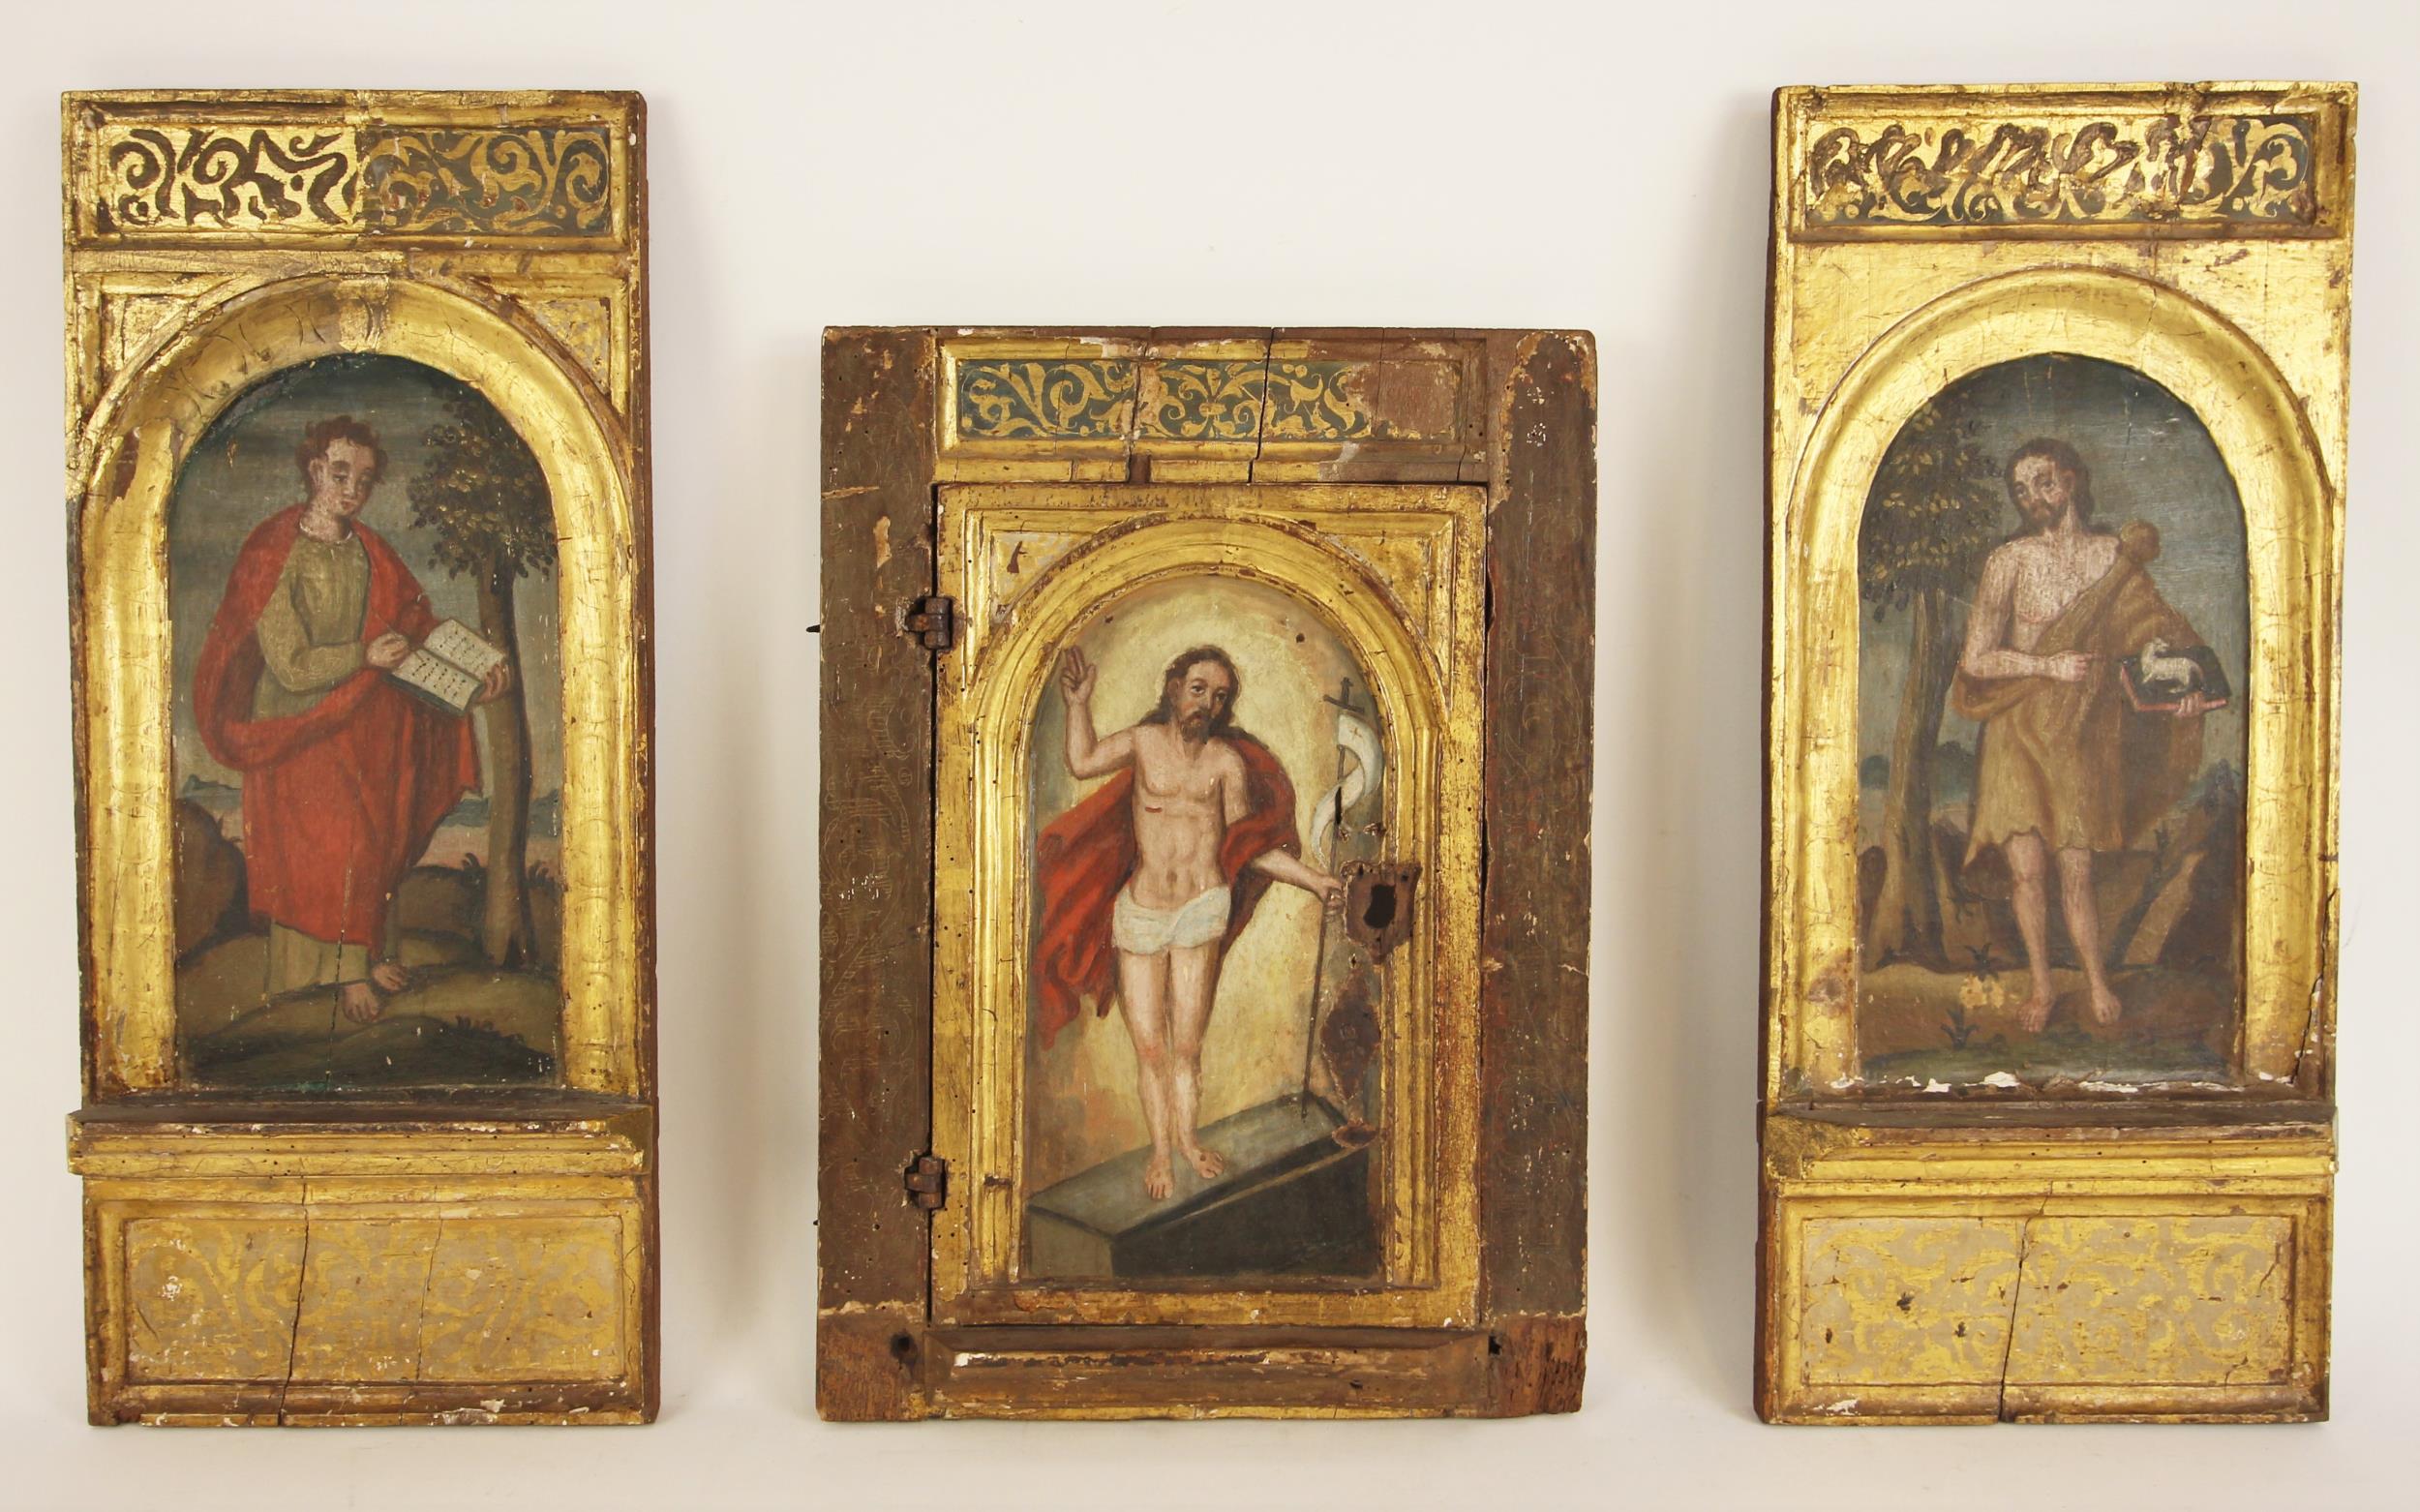 Three painted wooden panels, 19th century, probably taken from a Spanish altarpiece, each naively